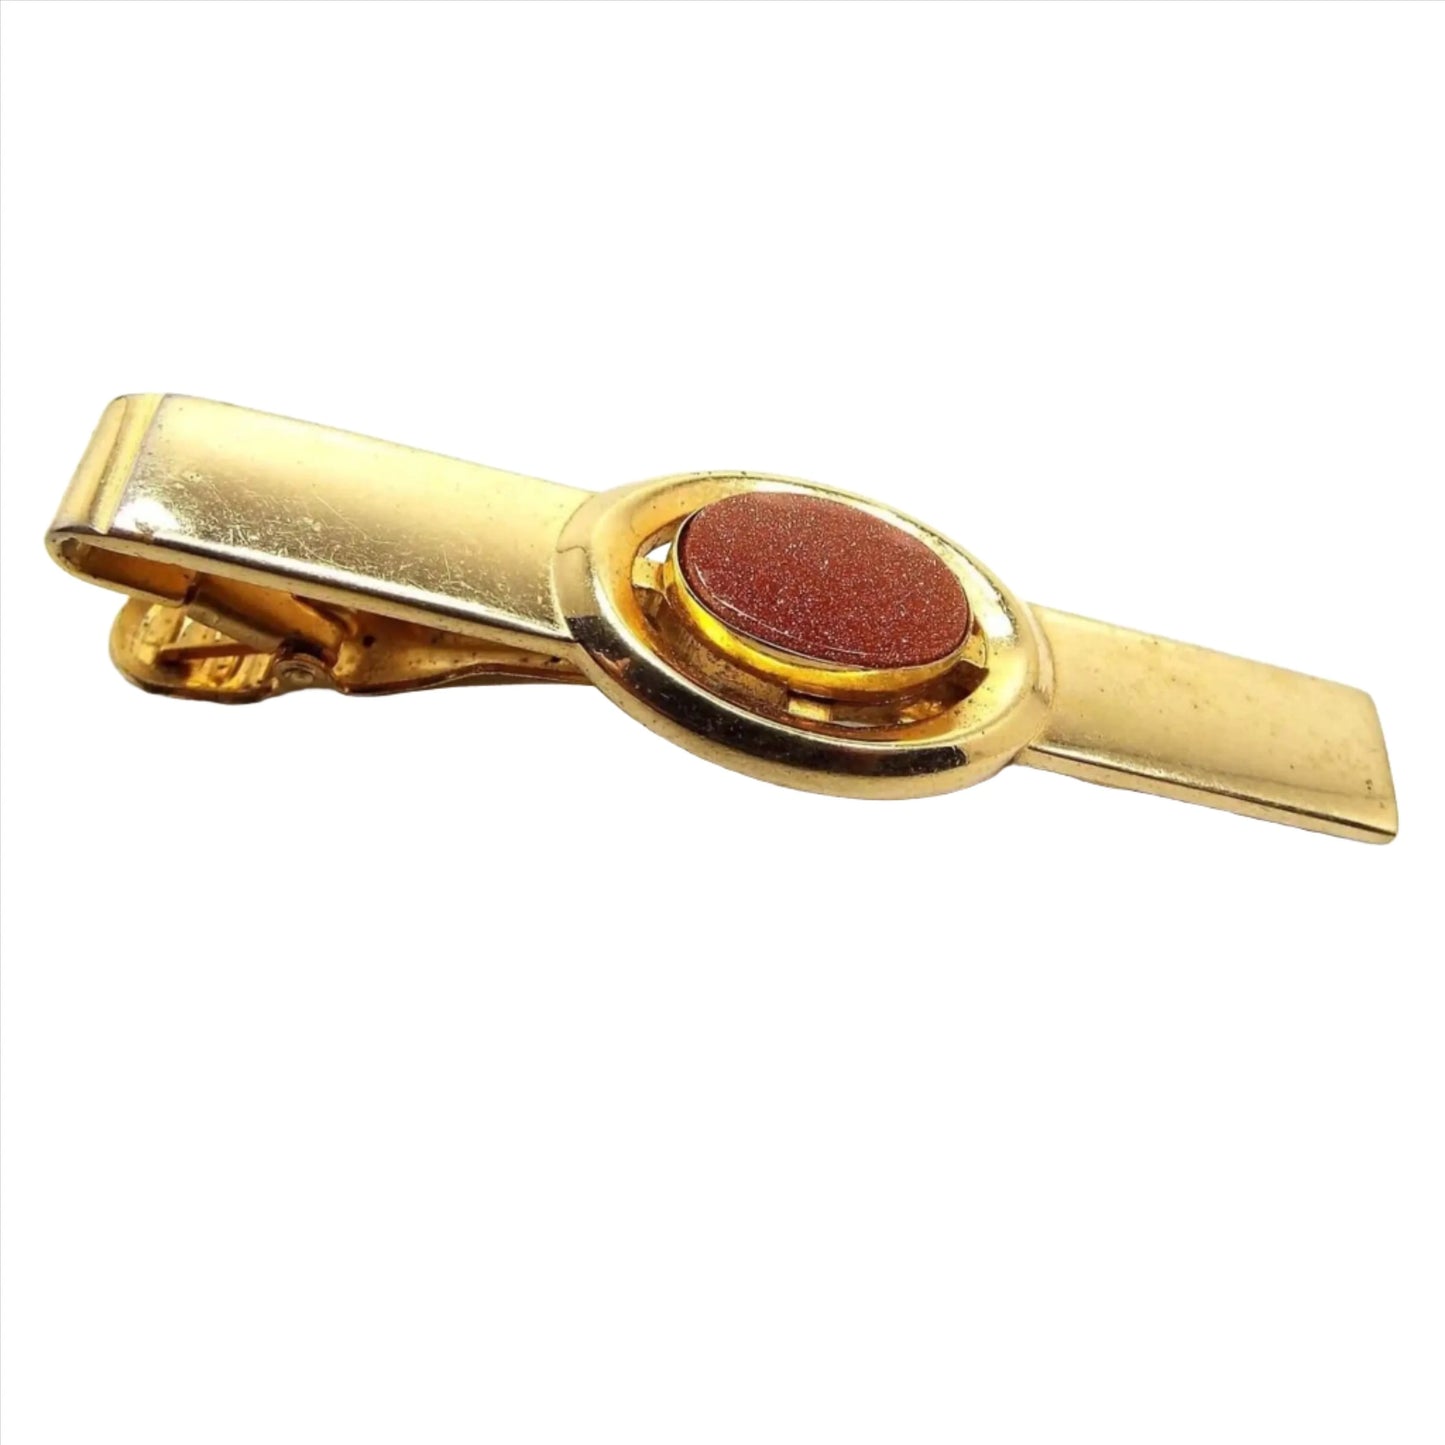 Top view of the Anson Mid Century vintage tie clip. It has a long rectangle shape with an oval in the middle. The metal is gold tone in color. The middle oval has a goldstone cab which is made of glass with tiny micro specks of copper glitter that sparkles as you move around. It is a burnt orange in color. Tie clip has an alligator style clip on the back.